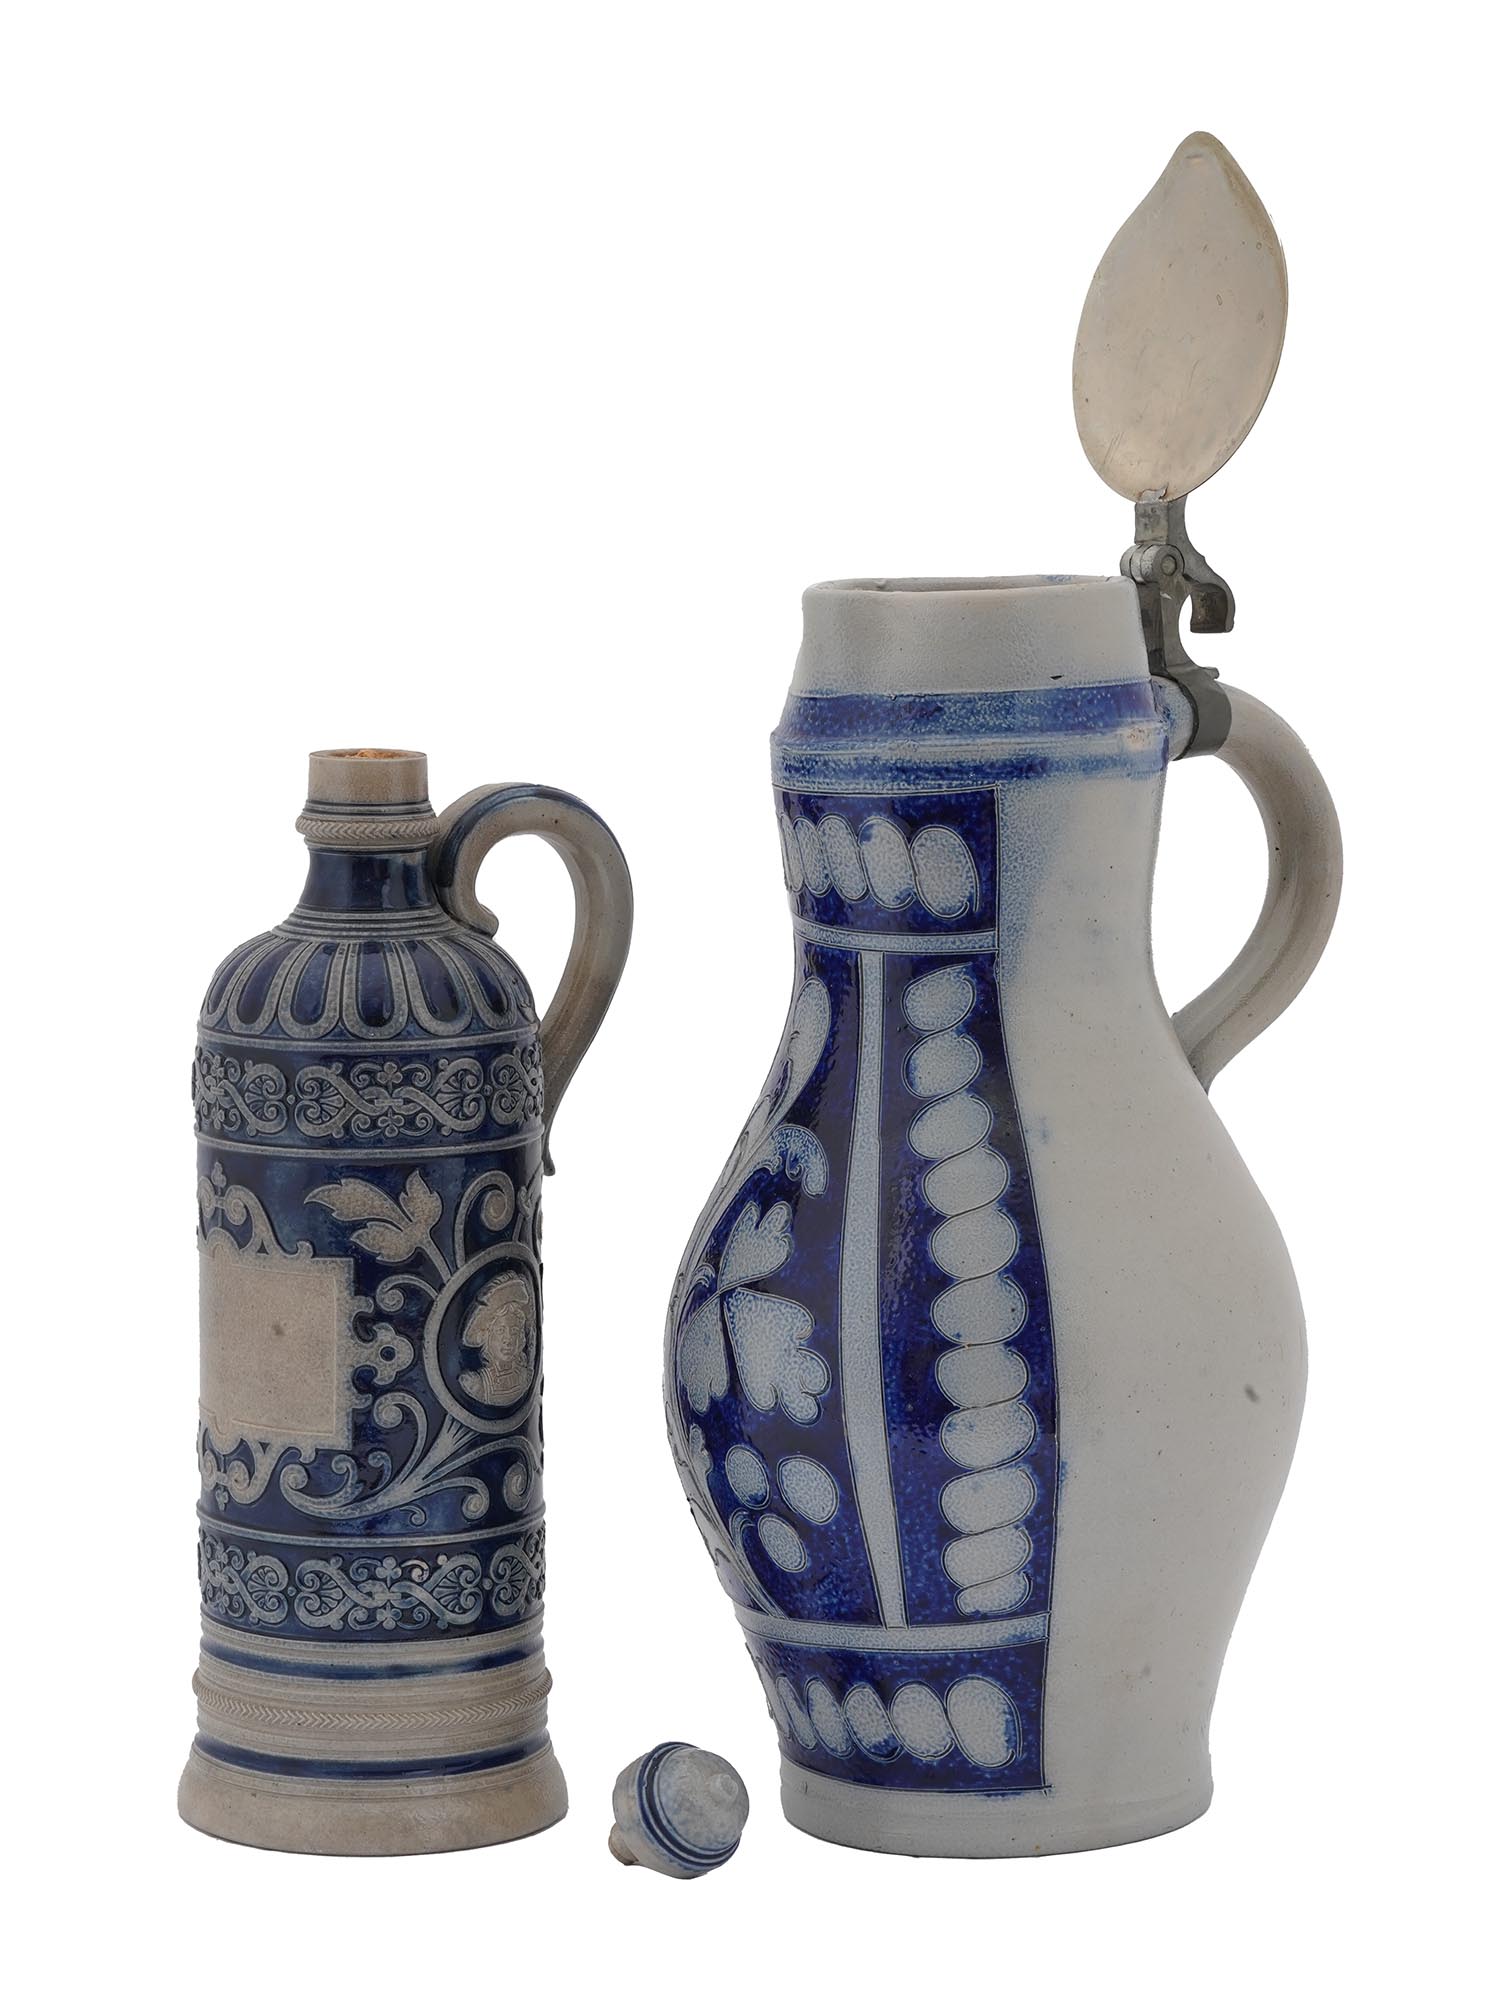 ANTIQUE FRENCH BLUE AND WHITE CERAMIC CIDER JUGS PIC-5